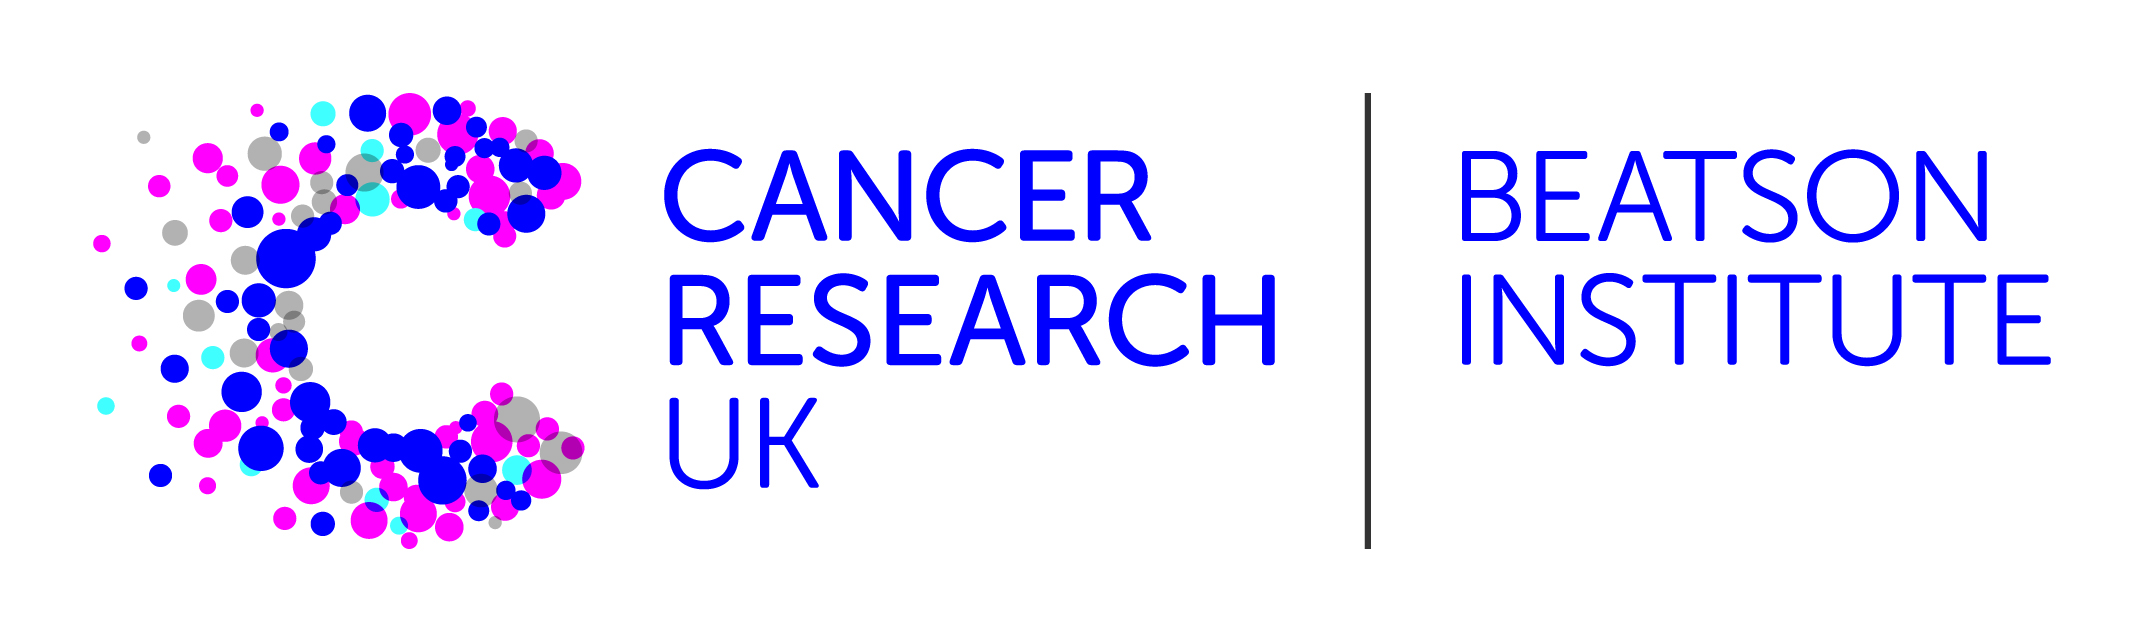 cancer research jobs glasgow